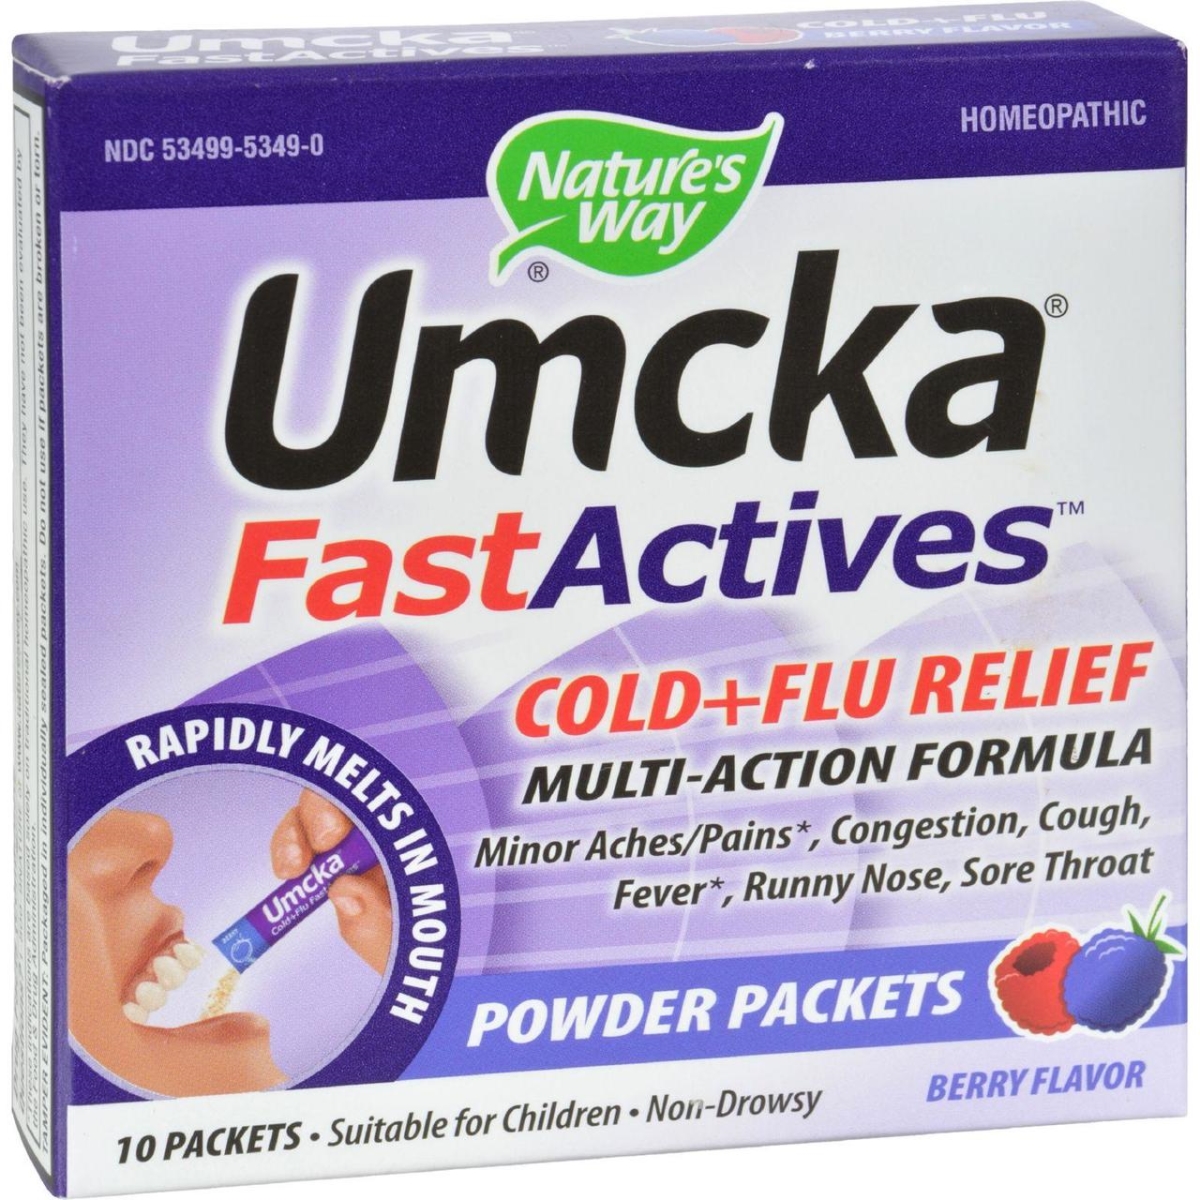 Hg0807040 Umcka Fastactives Cold Plus Flu Relief Berry - 10 Packets